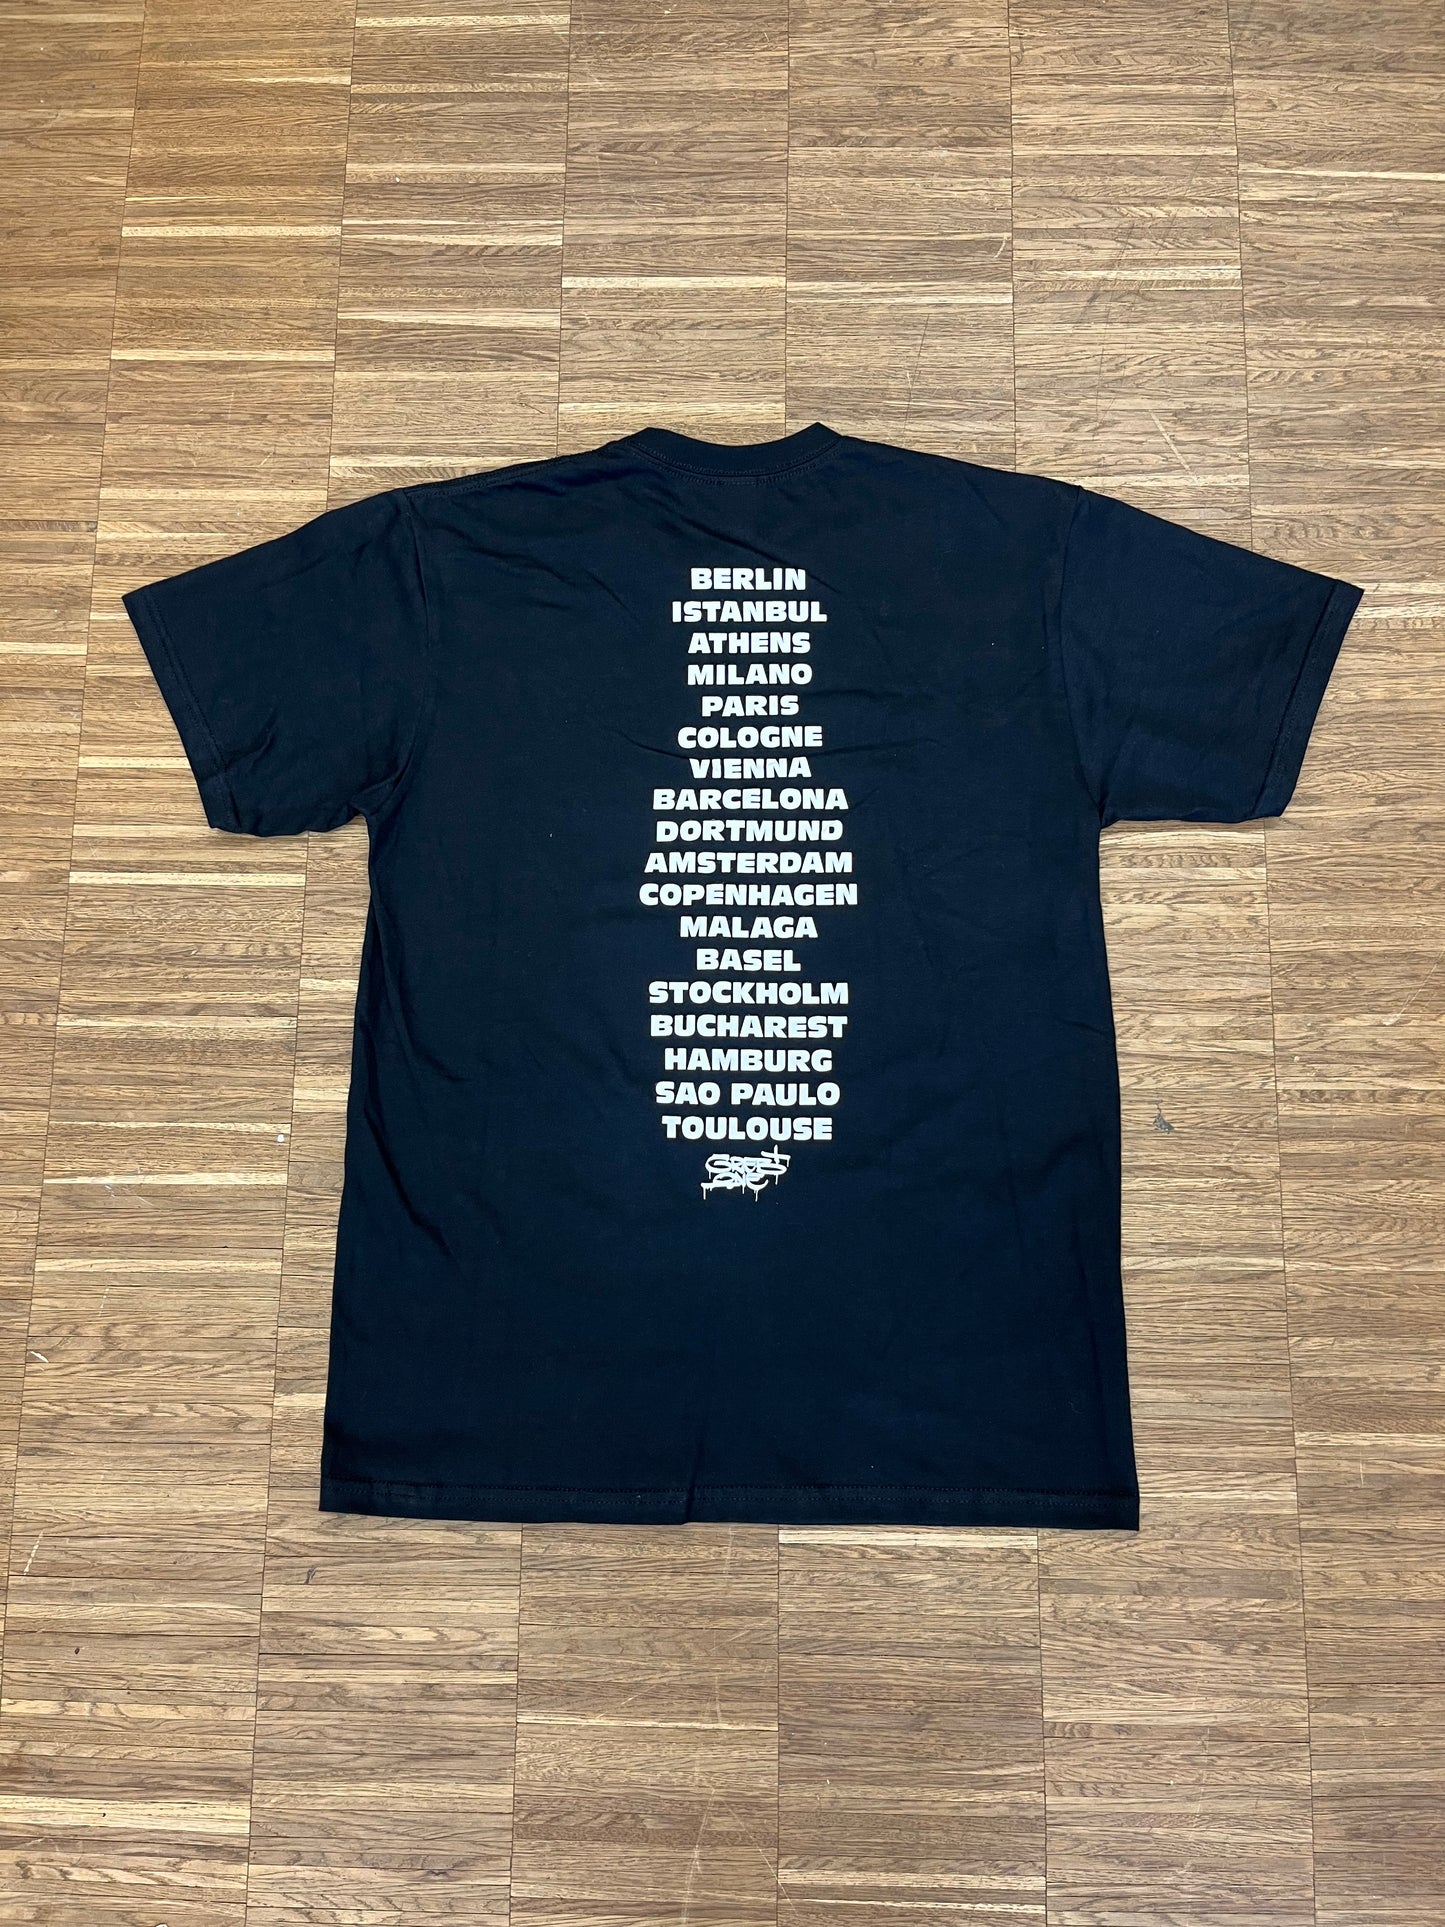 GREB "The Whole World Is Your Home" Shirt Black